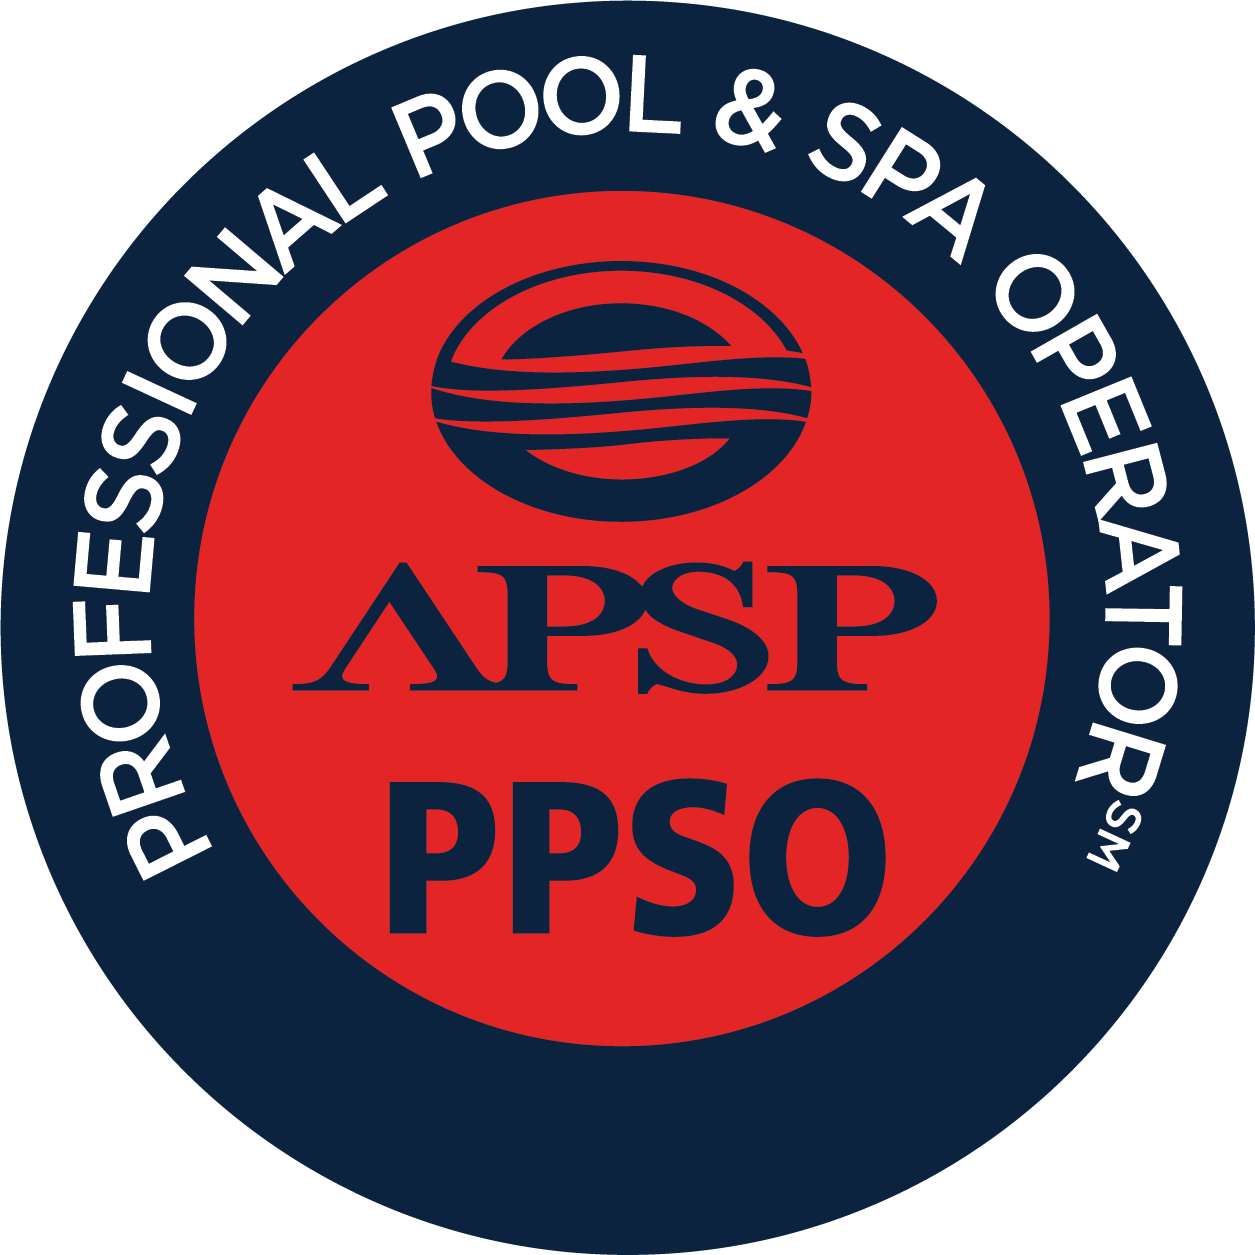 Red O Logo - The Association of Pool & Spa Professionals